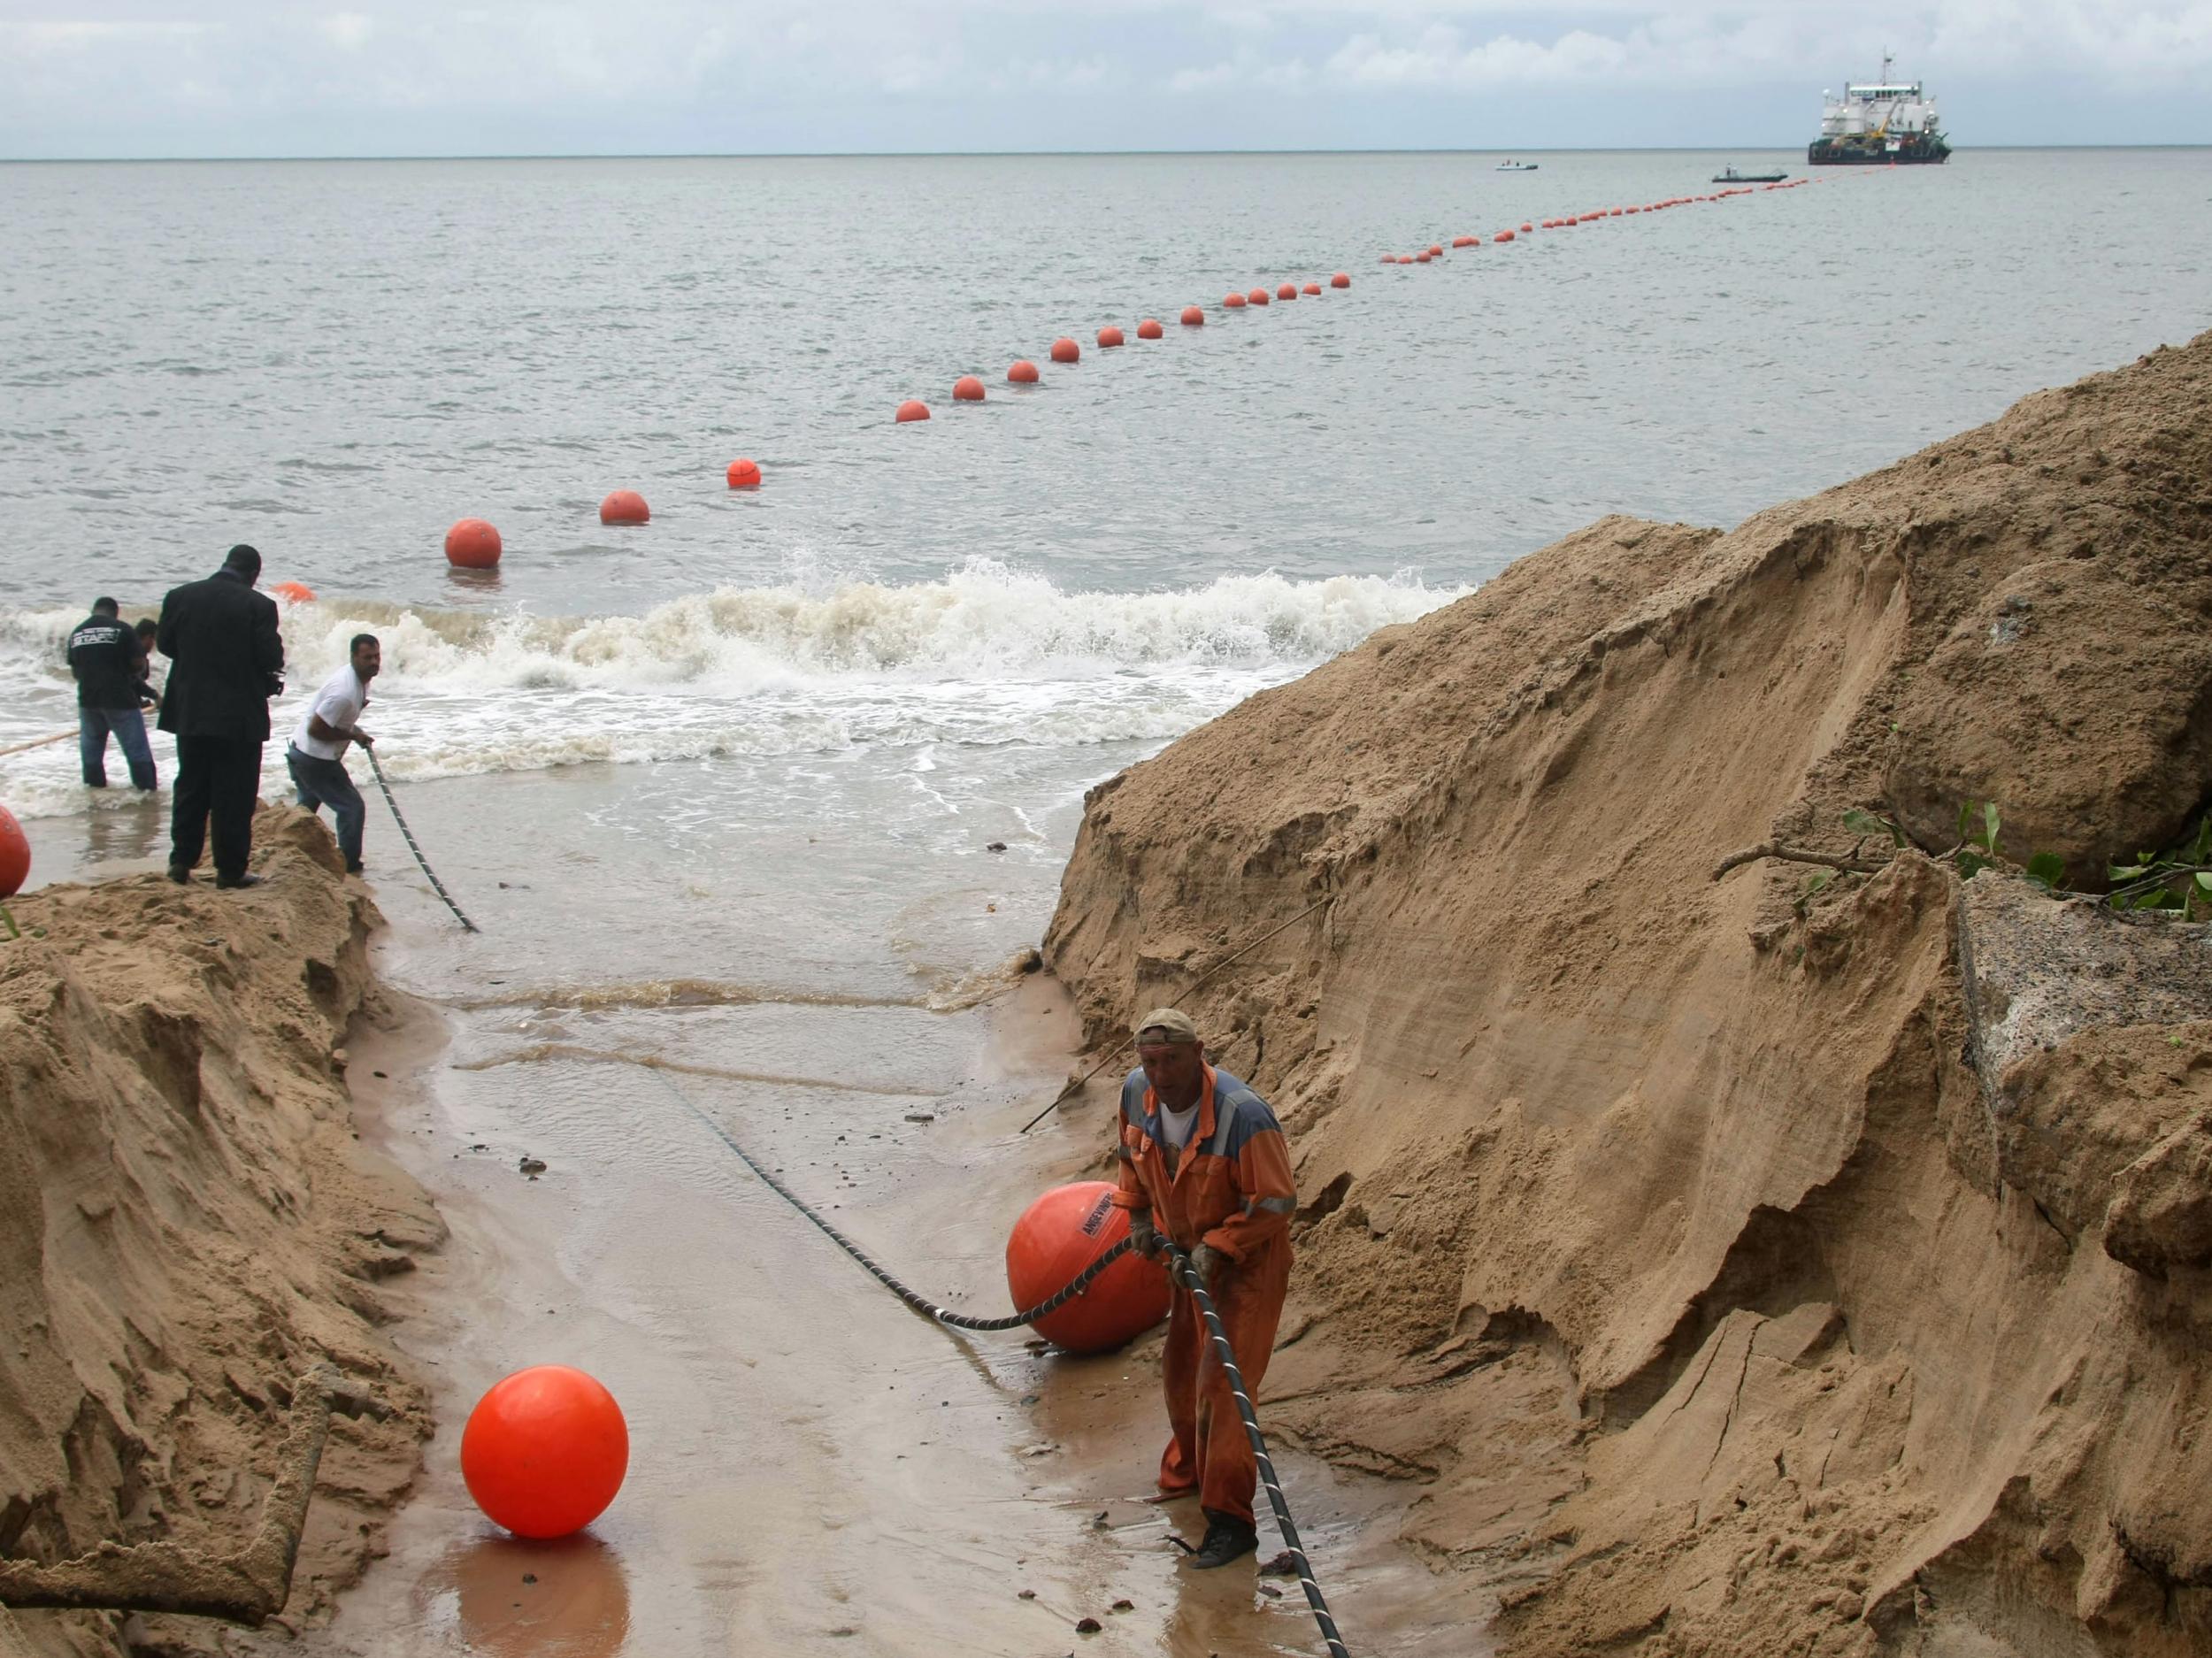 Technicians working on the installation of the ACE submarine fiber optic cable on the shores of Libreville, Gabon, in October 2011